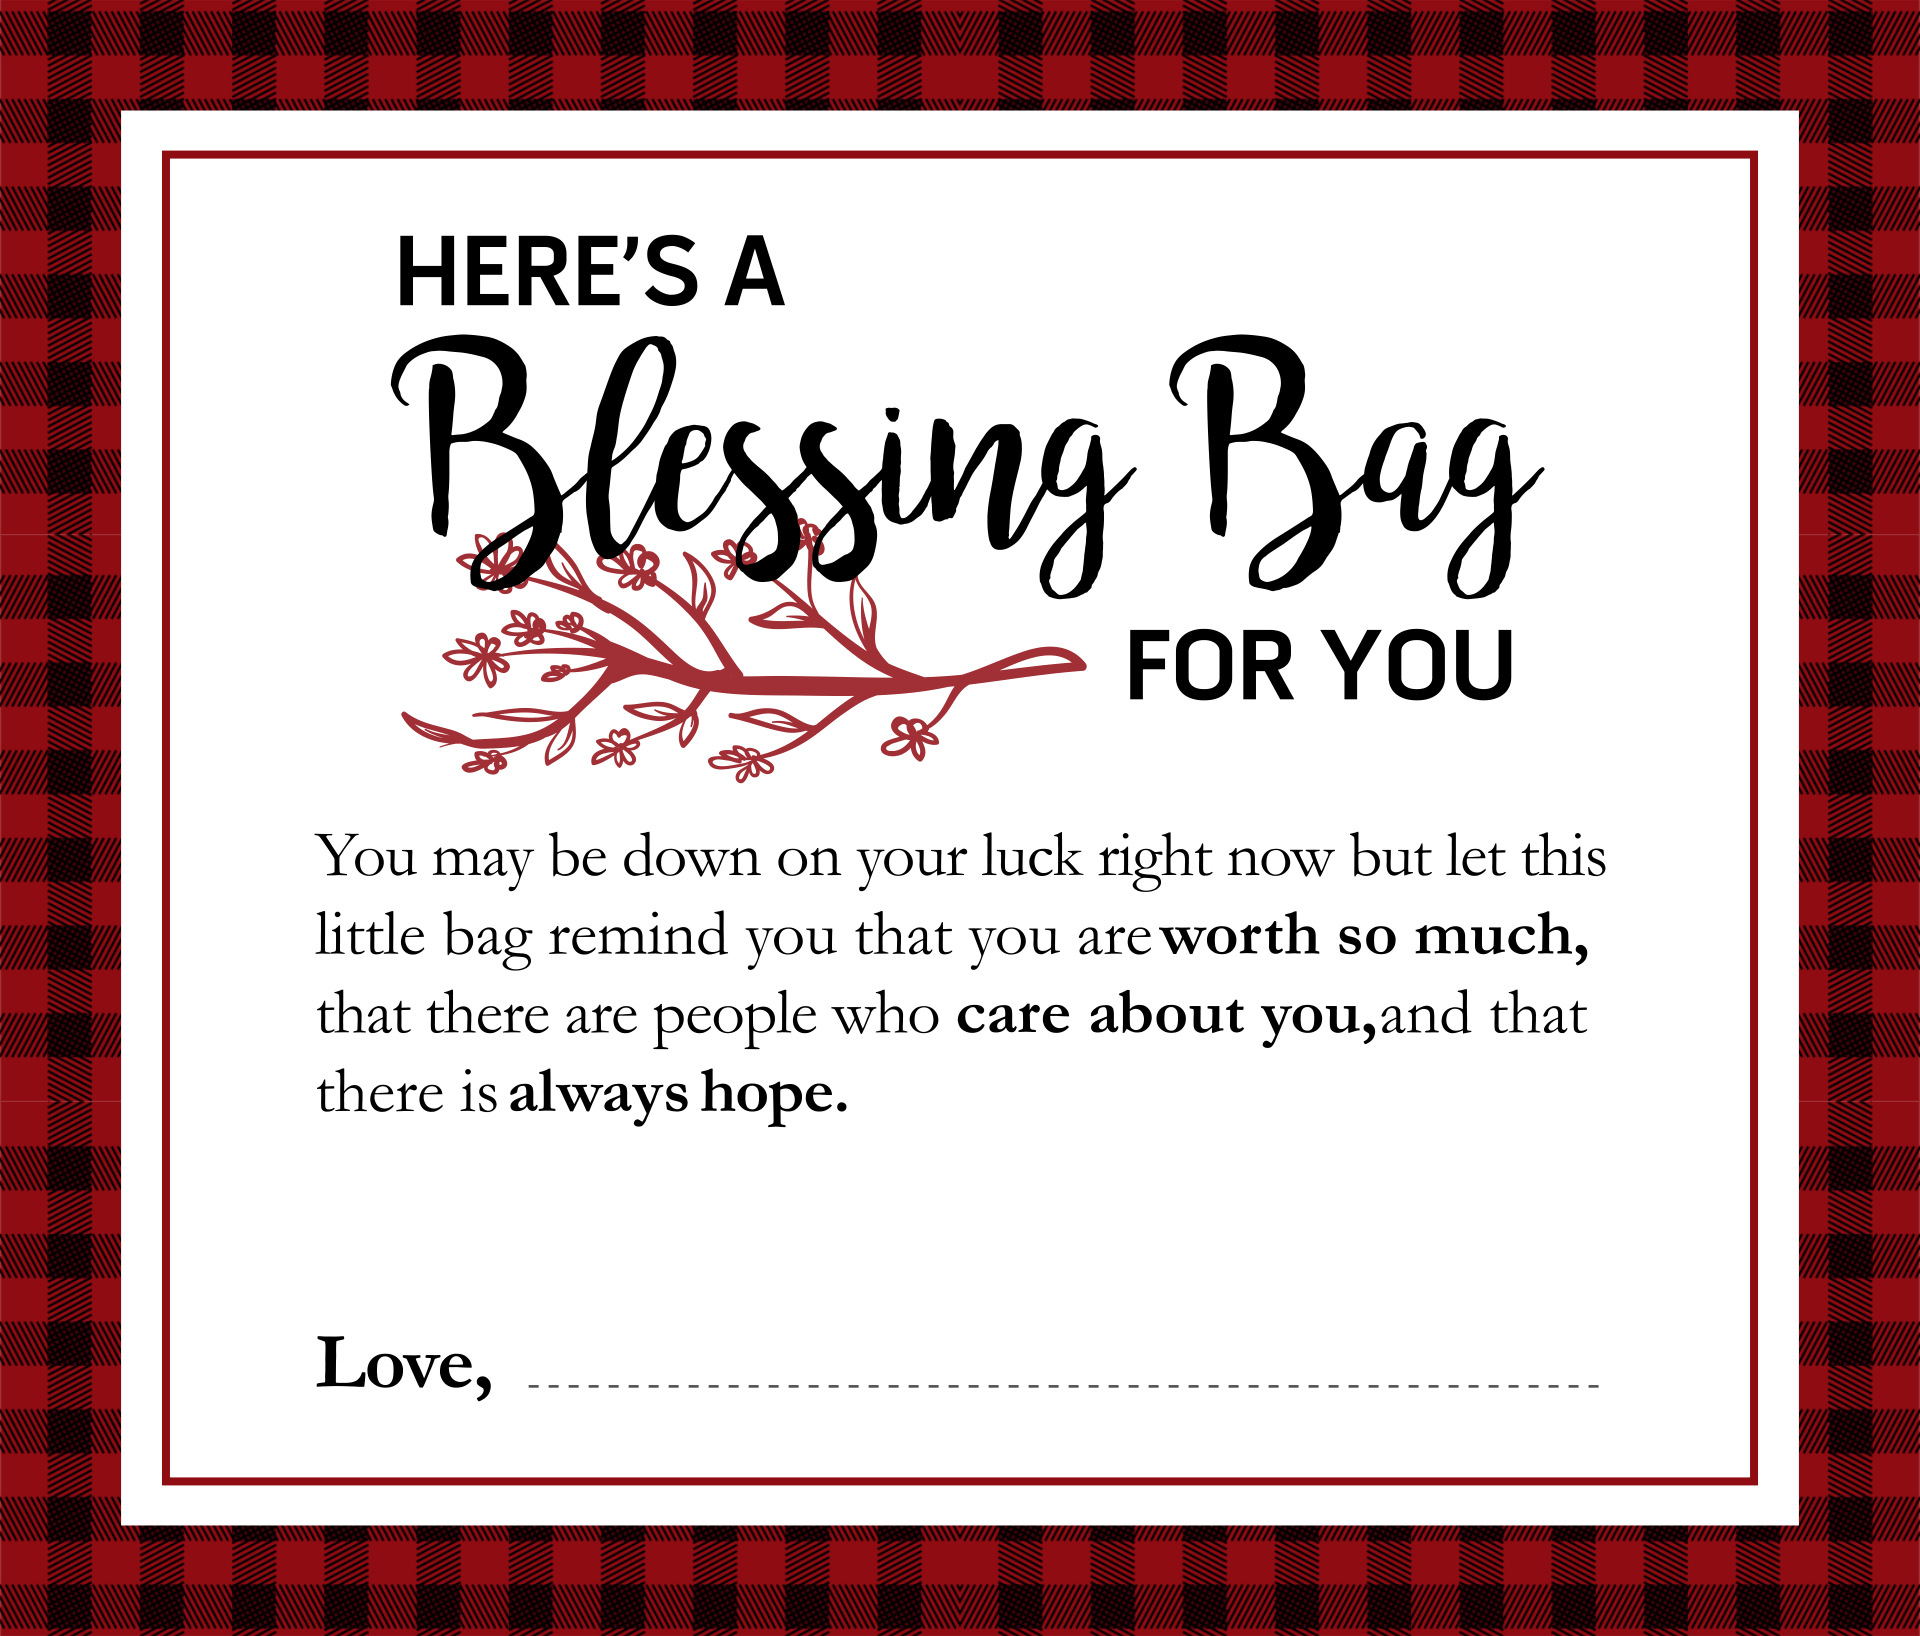 8-best-images-of-blessing-bags-scripture-printable-note-homeless